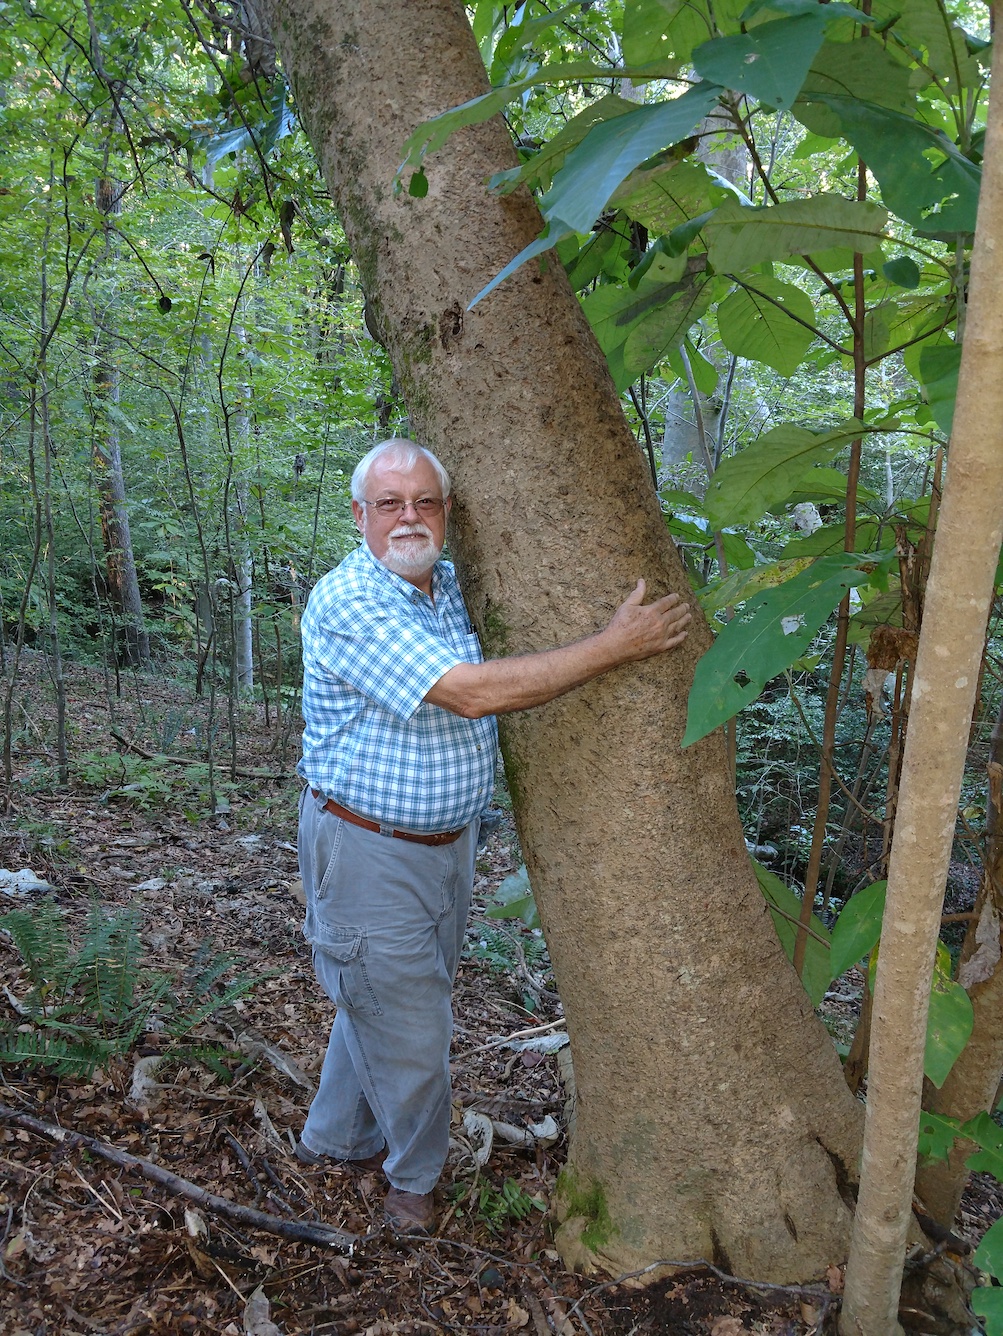 The Scientific Name is Magnolia macrophylla. You will likely hear them called Big Leaf Magnolia, Large-leaved Cucumber Tree . This picture shows the May be one of the largest specimens known of Magnolia macrophylla